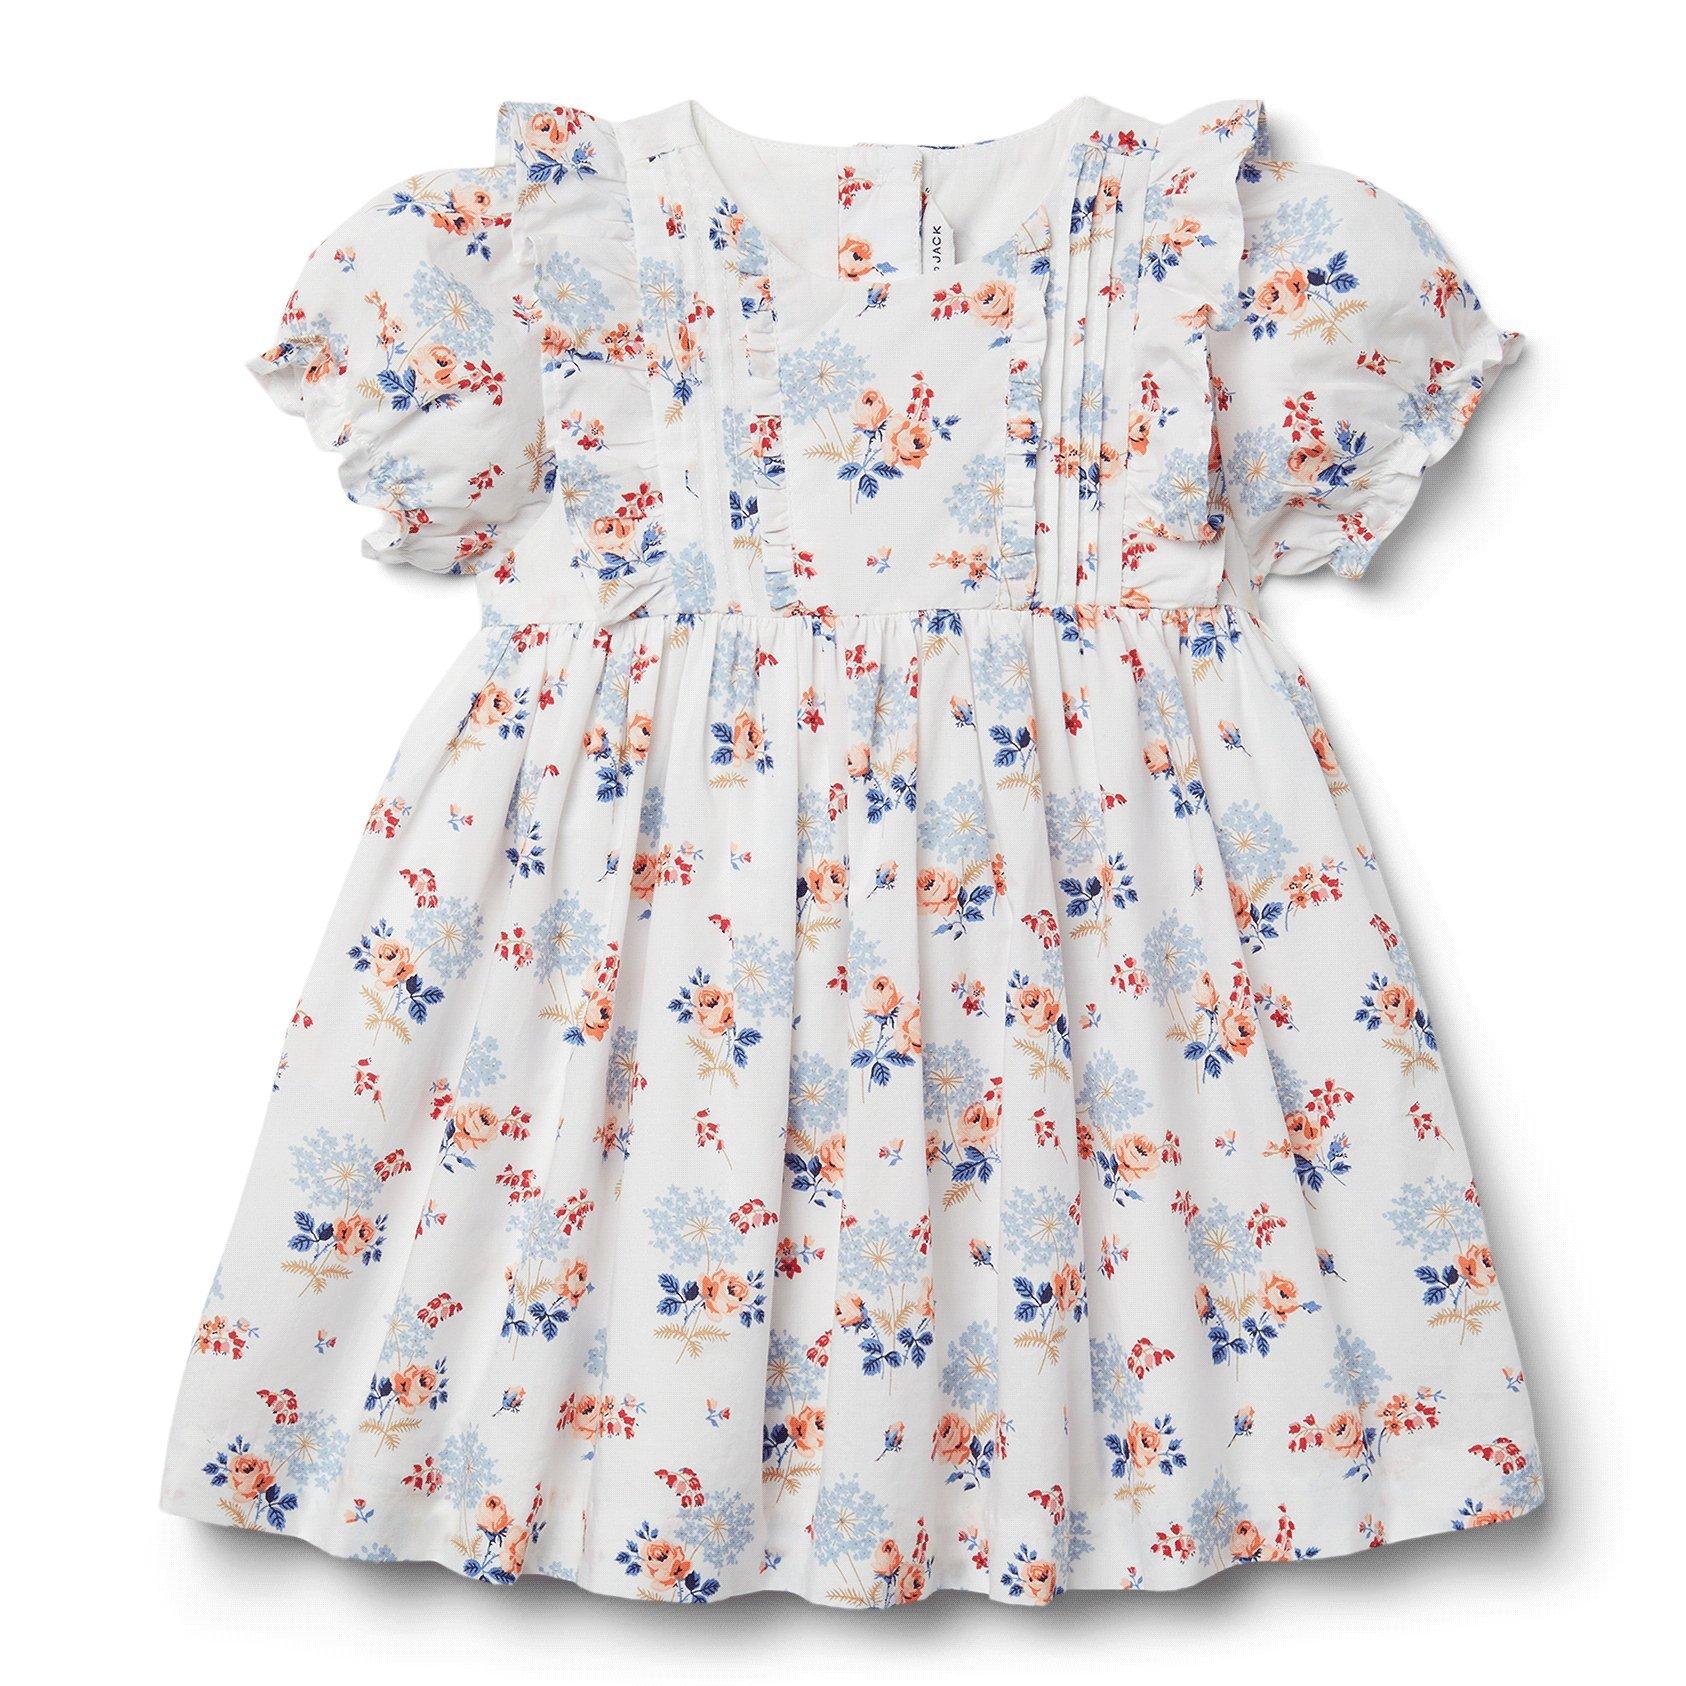 Newborn Jet Ivory Floral Baby Floral Pintuck Dress by Janie and Jack